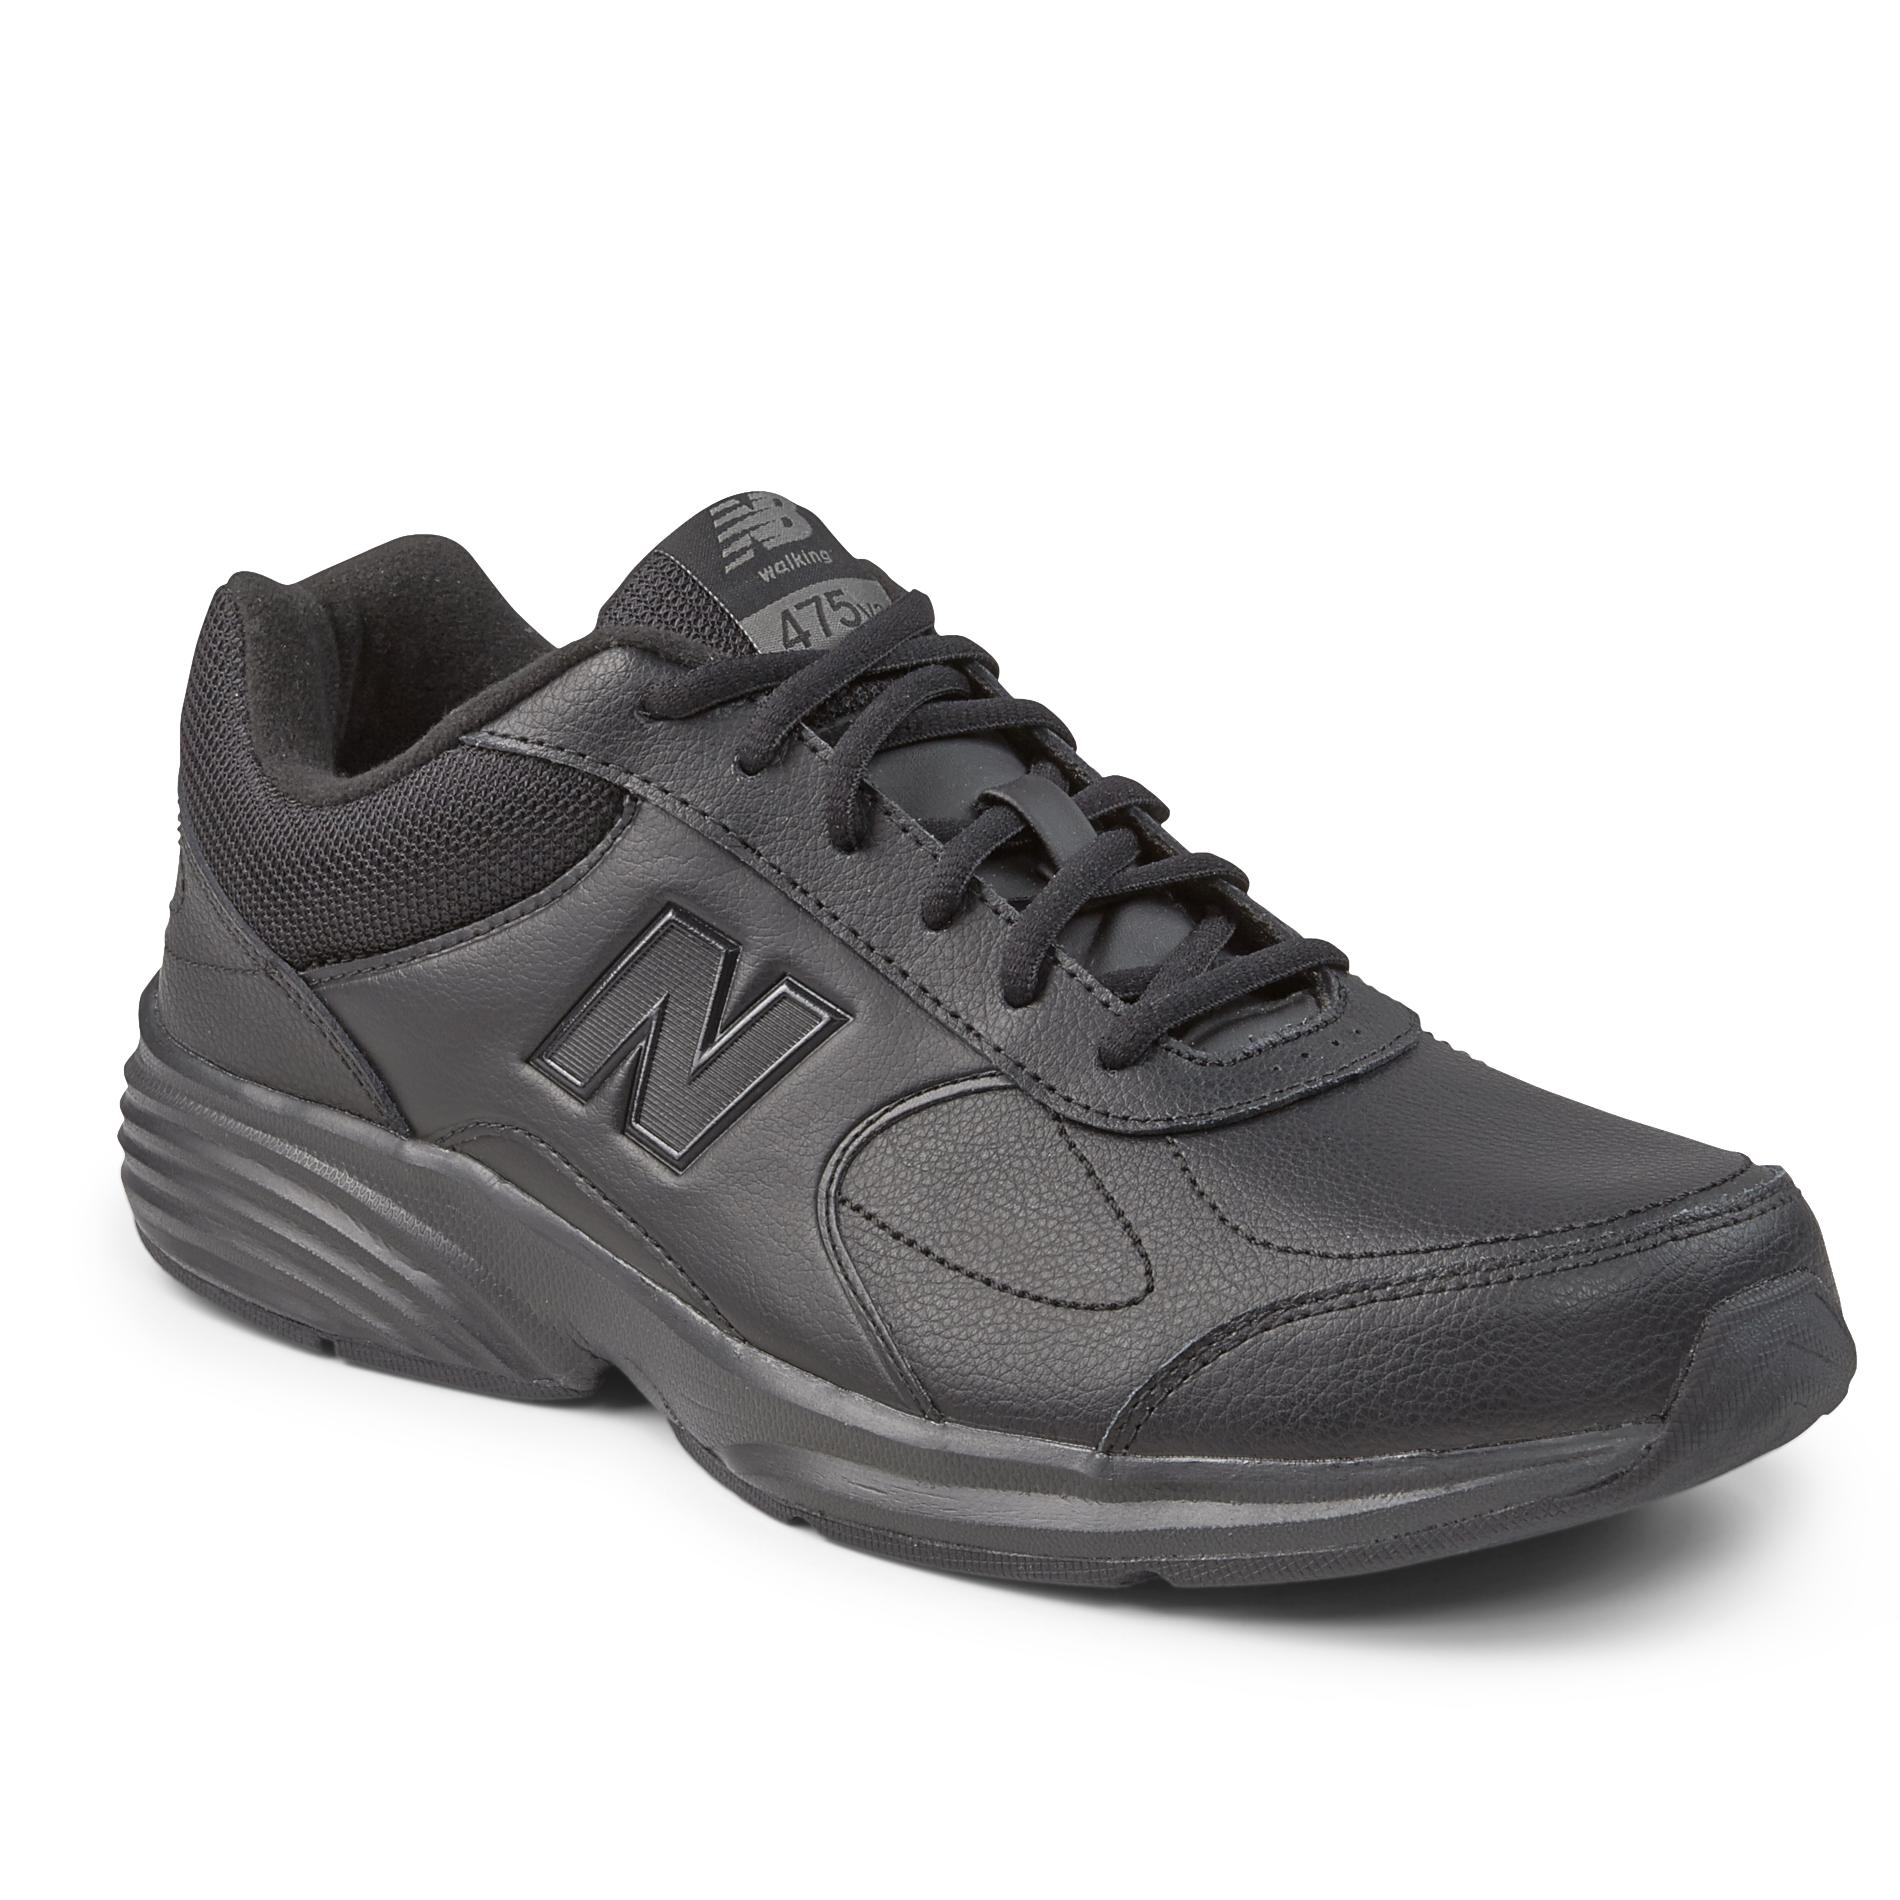 new balance shoes with wide toe box